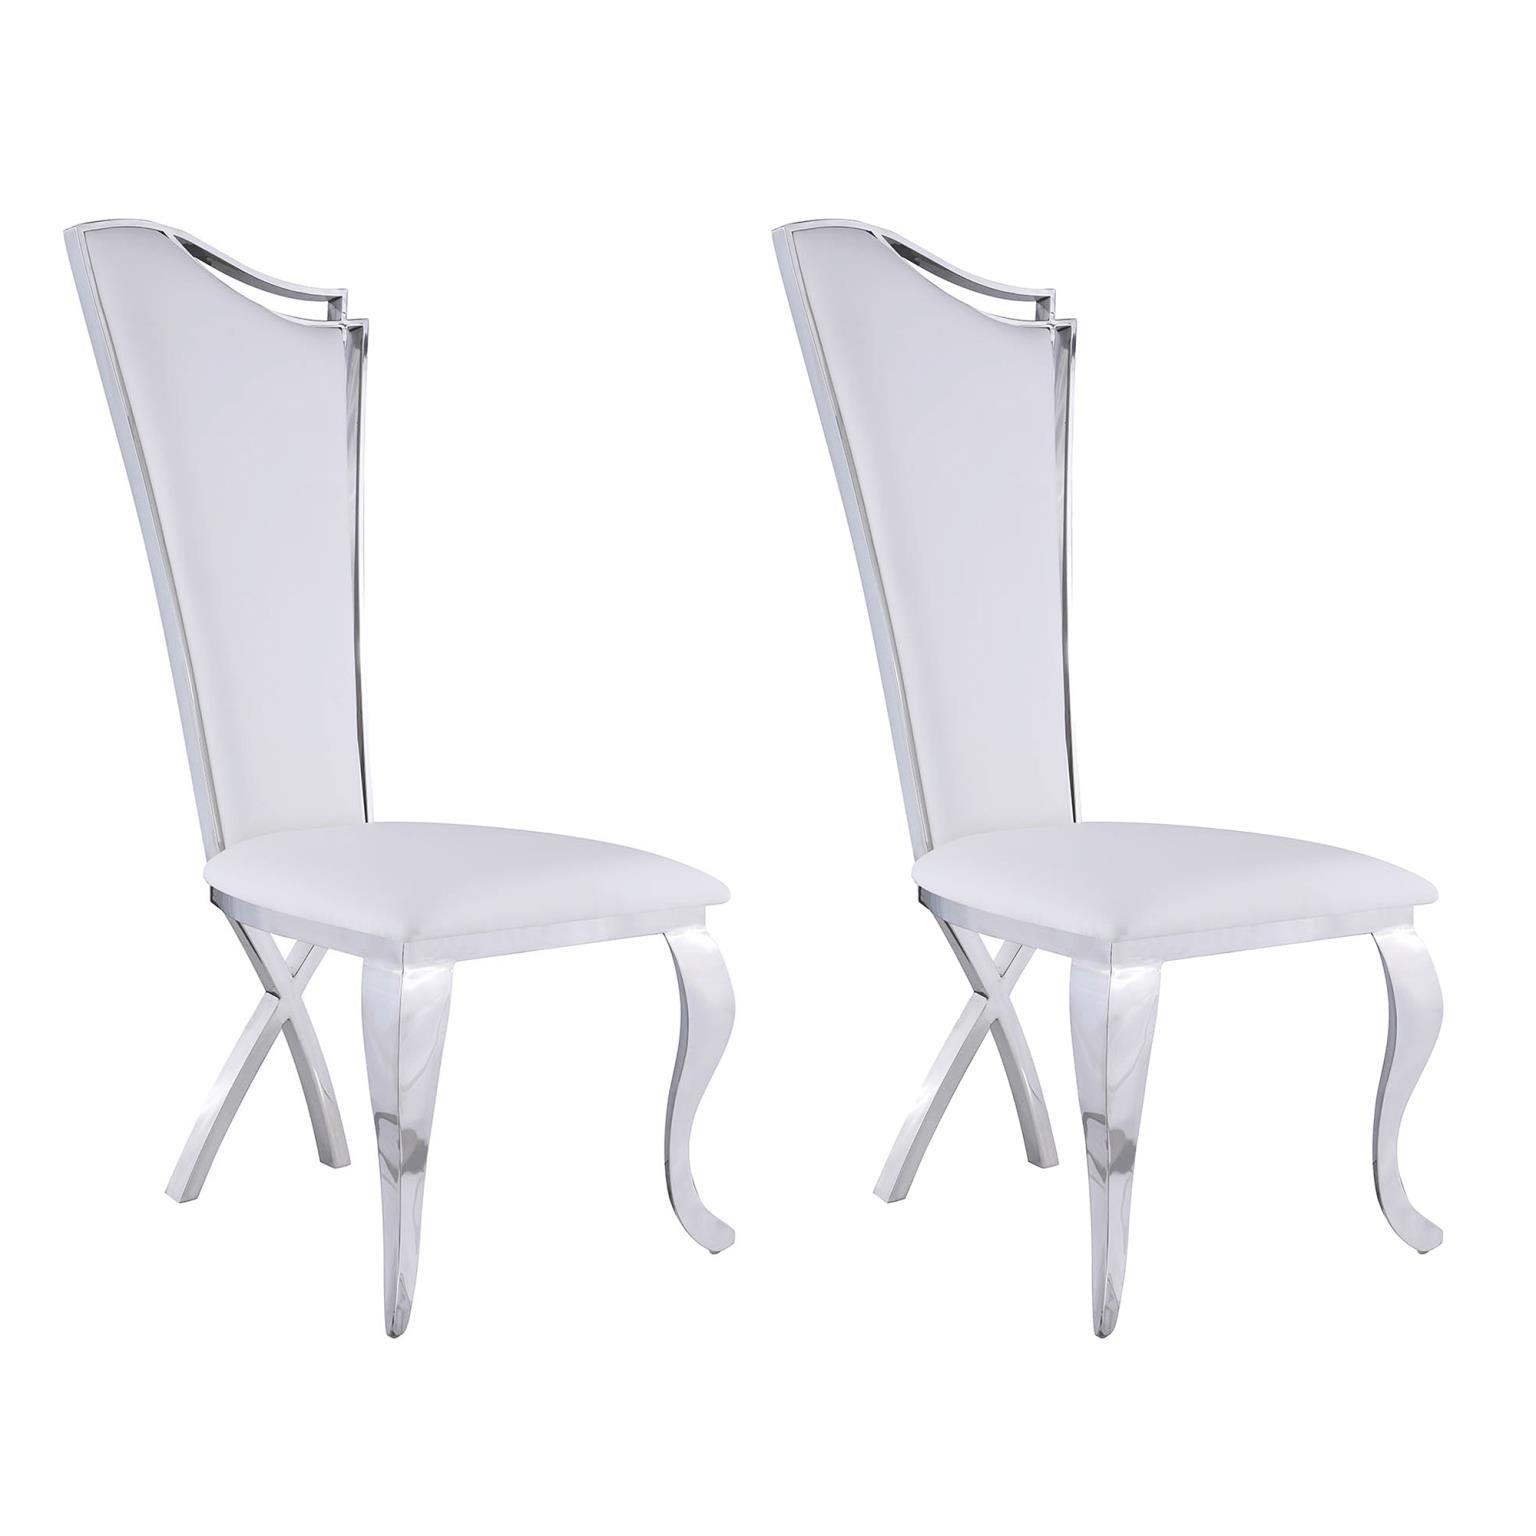 Nadine Dining chair in White Upholstery - Euro Living Furniture